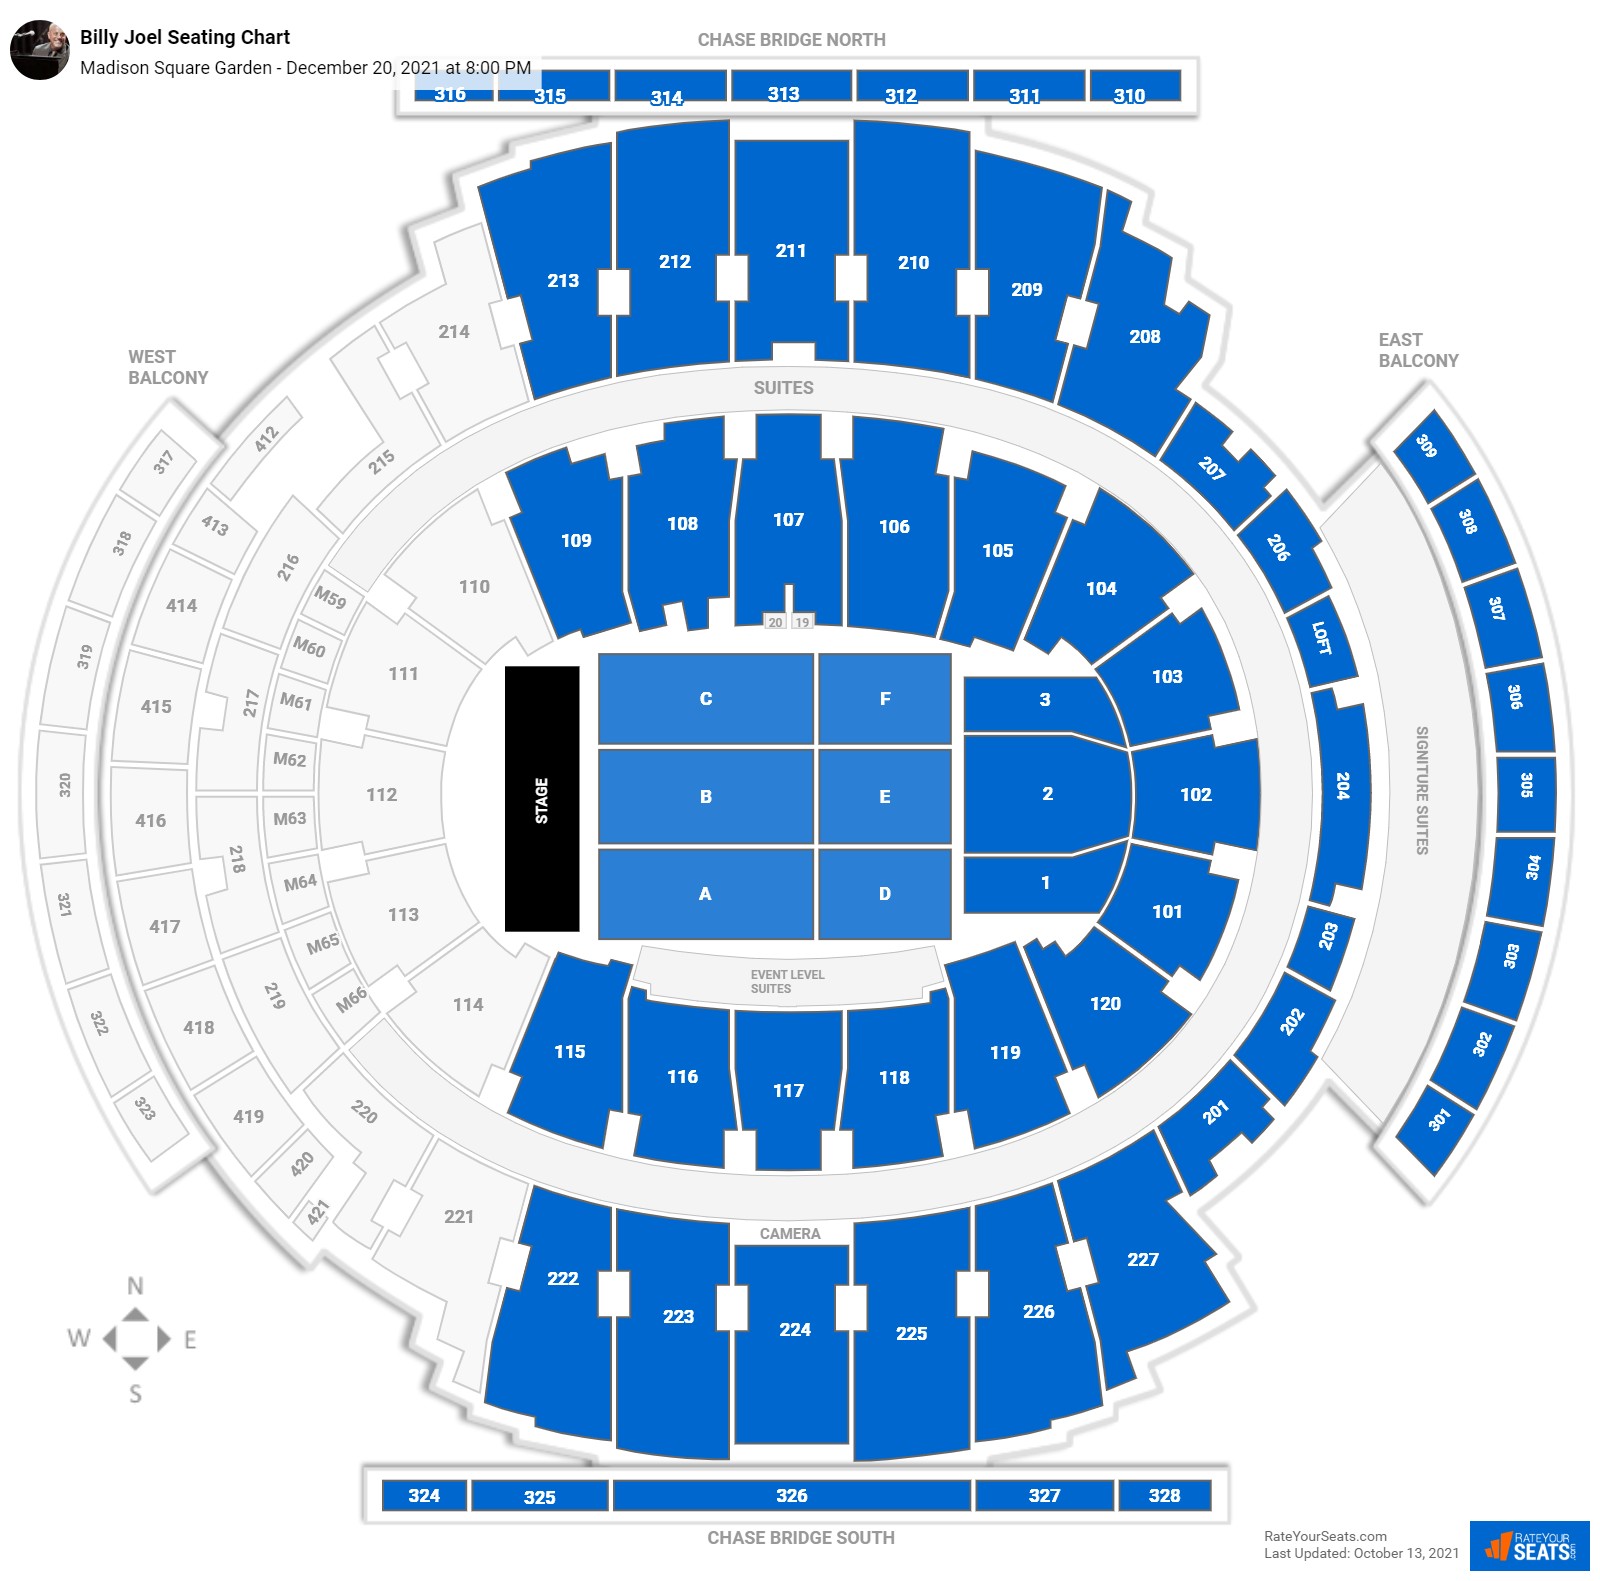 Madison Square Garden Concert Seating Chart - RateYourSeats.com